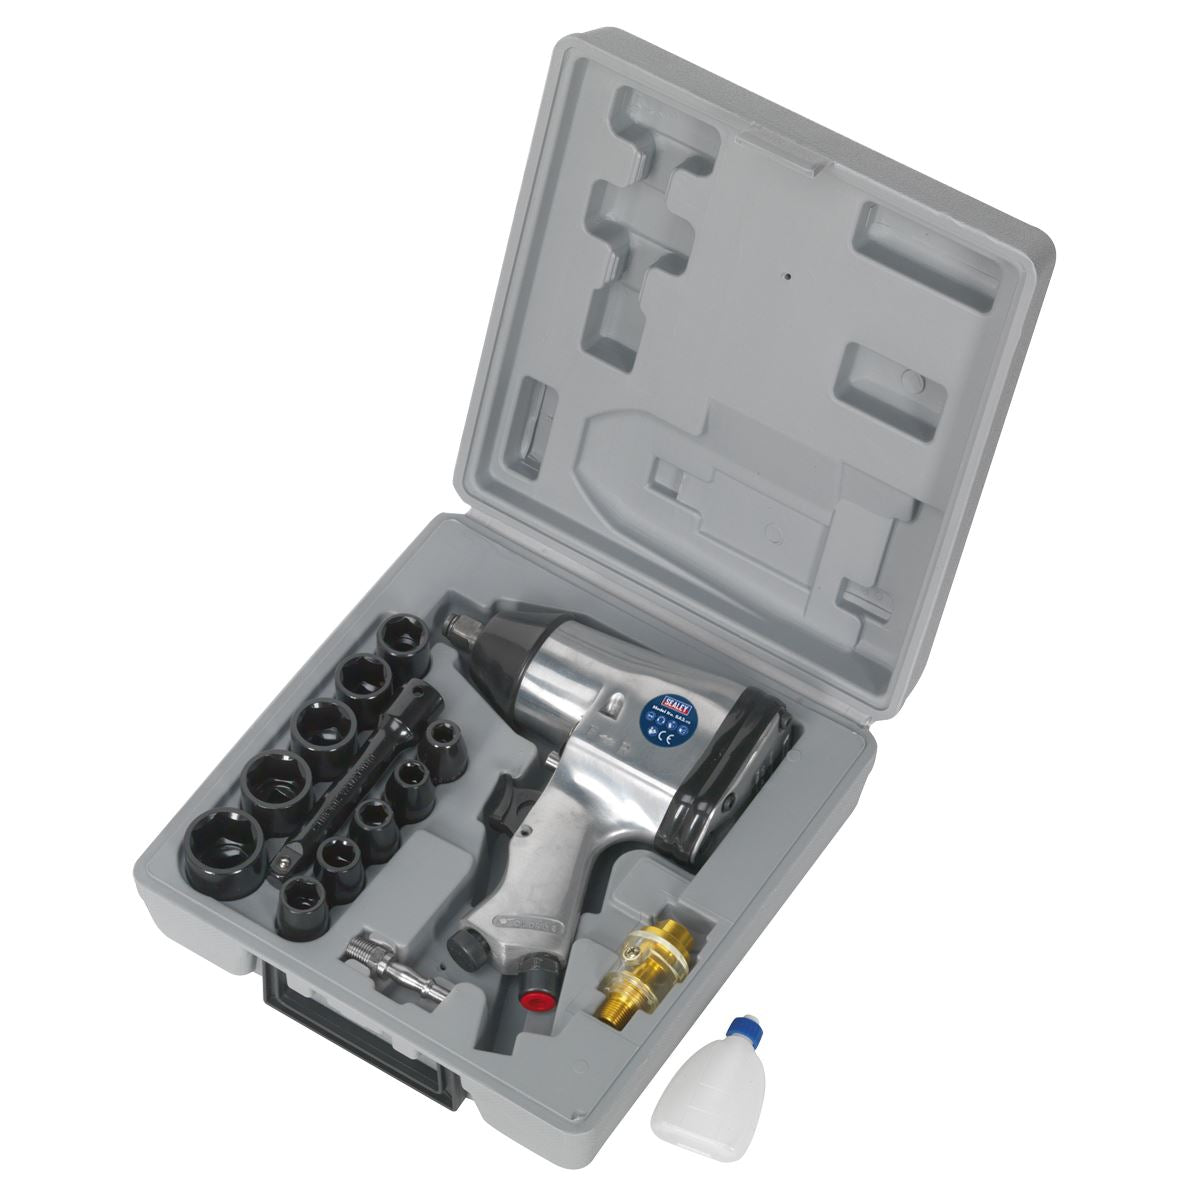 Sealey Air Impact Wrench Kit with Sockets 1/2"Sq Drive